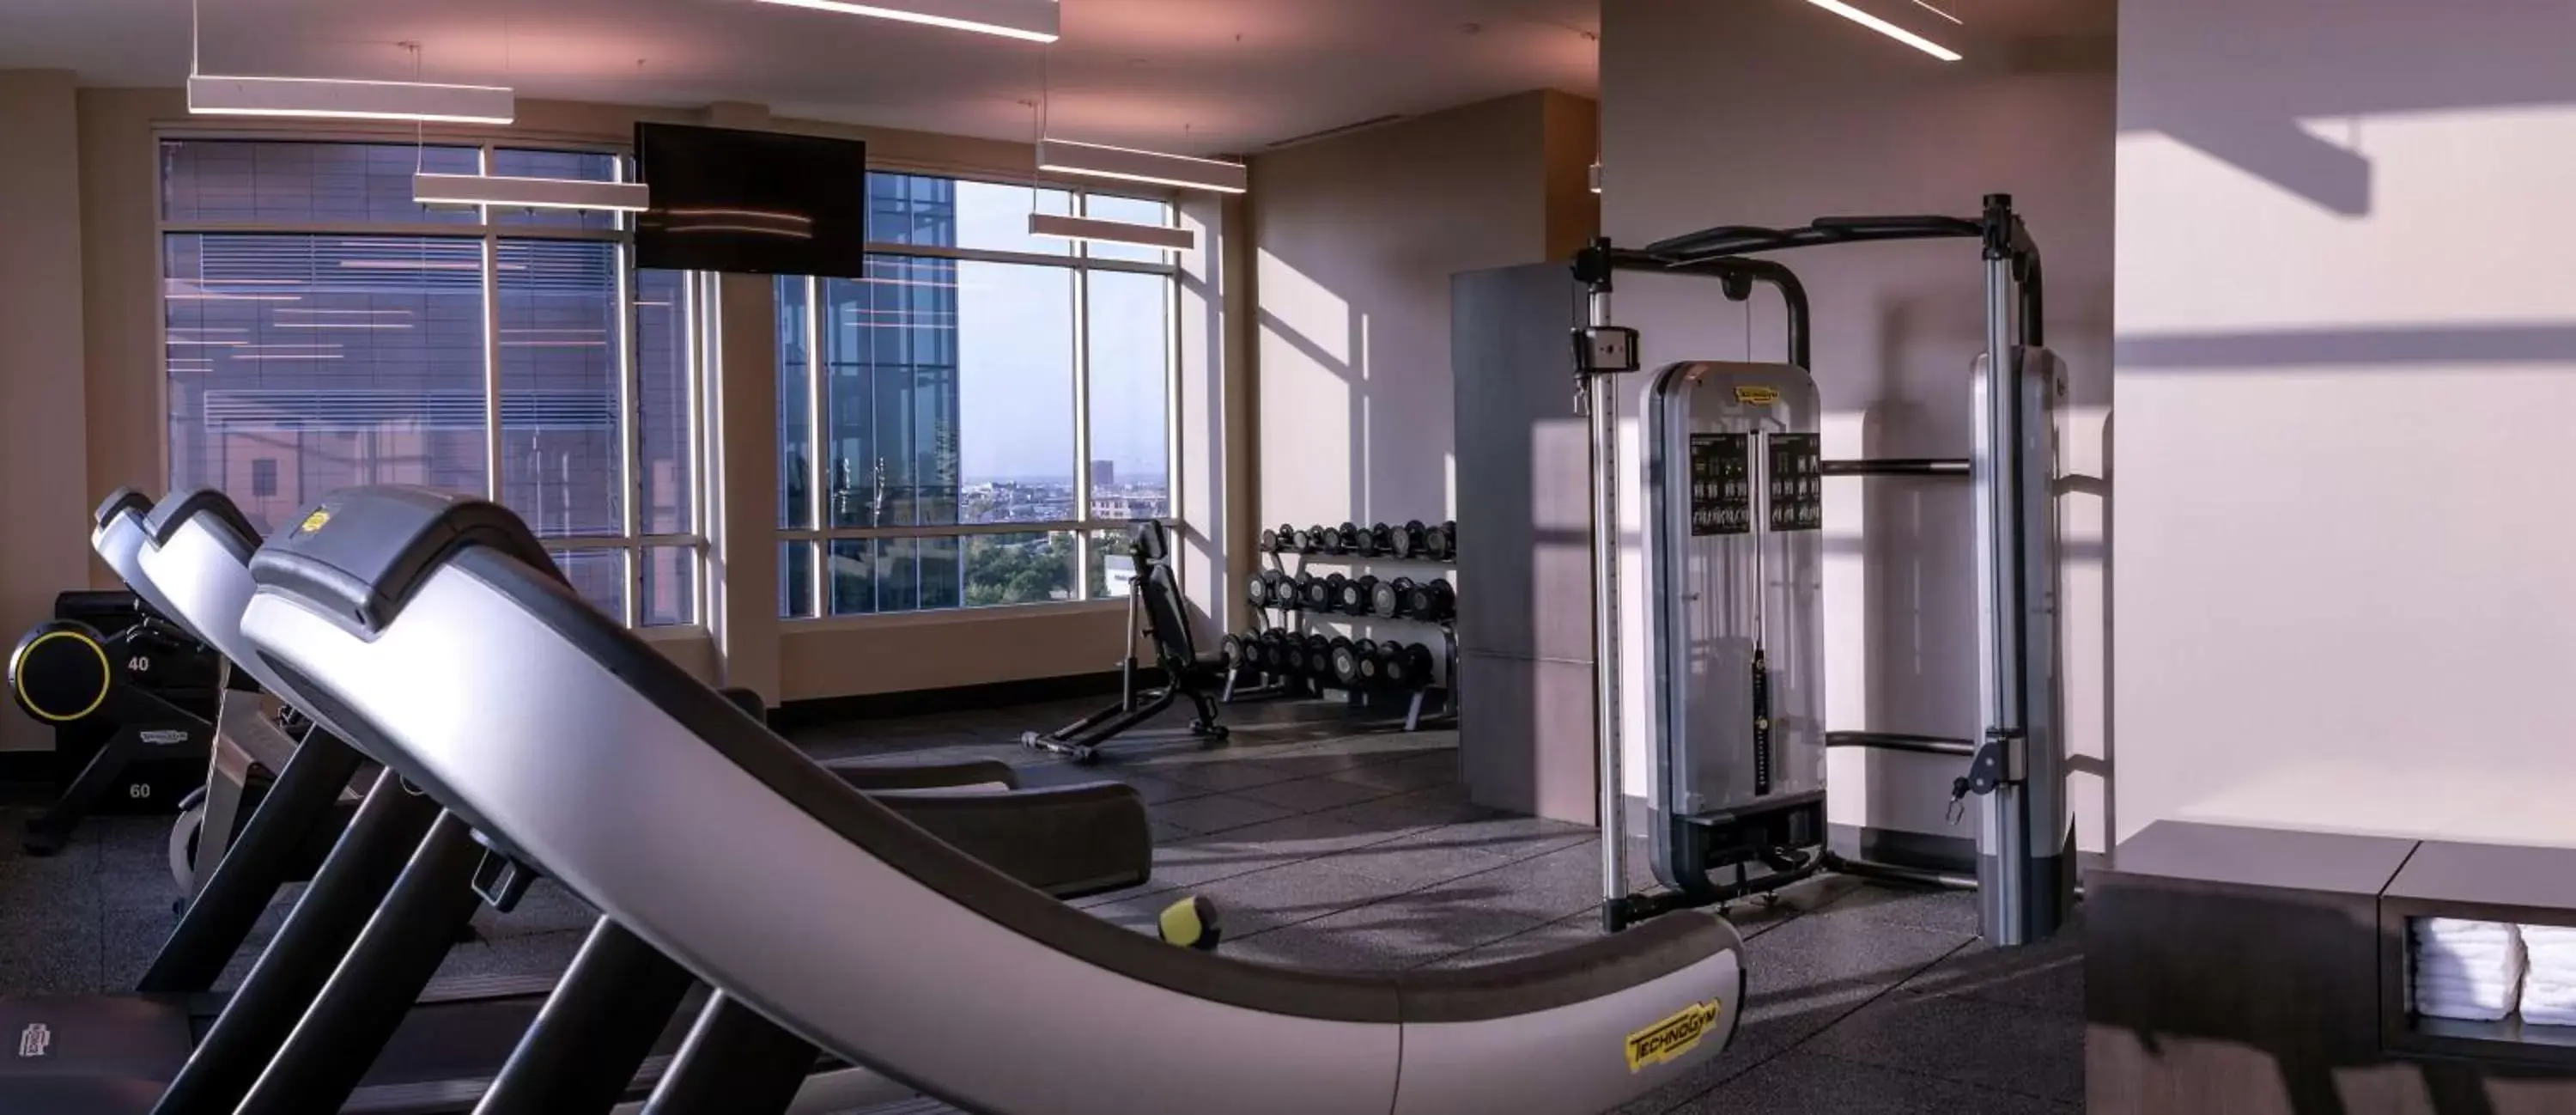 Fitness centre/facilities, Fitness Center/Facilities in Canopy By Hilton Dallas Uptown